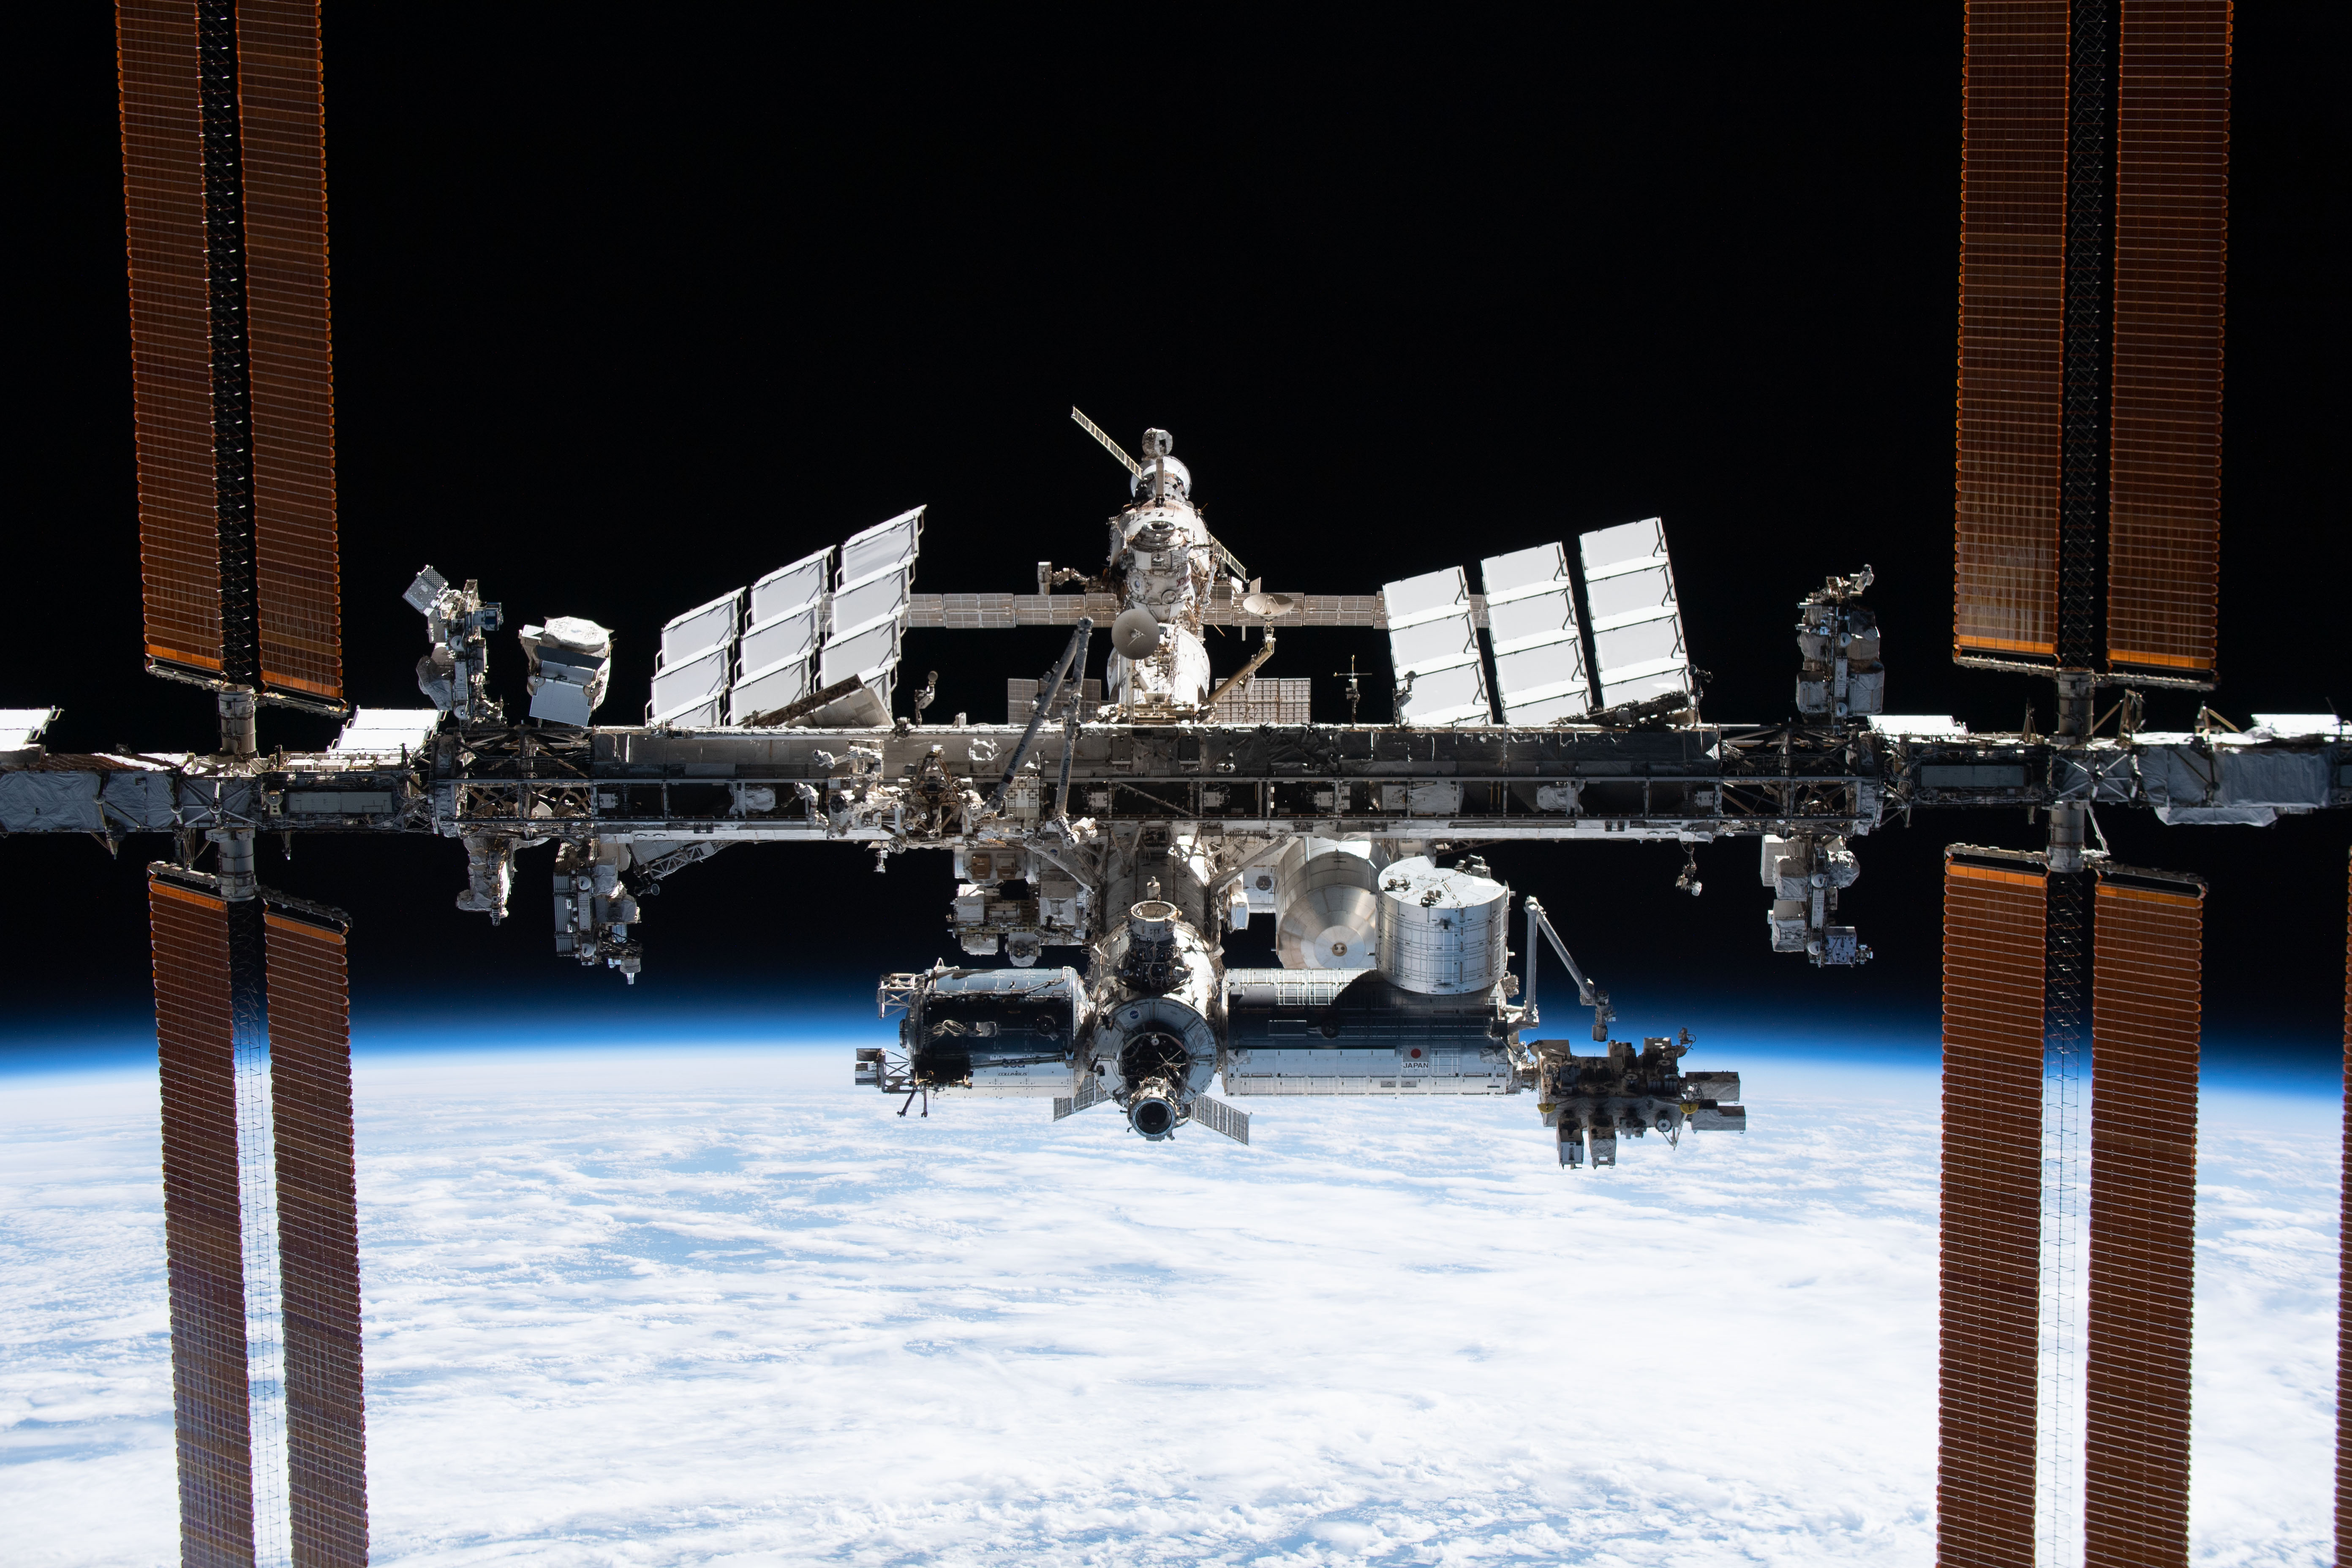 The ISS space station